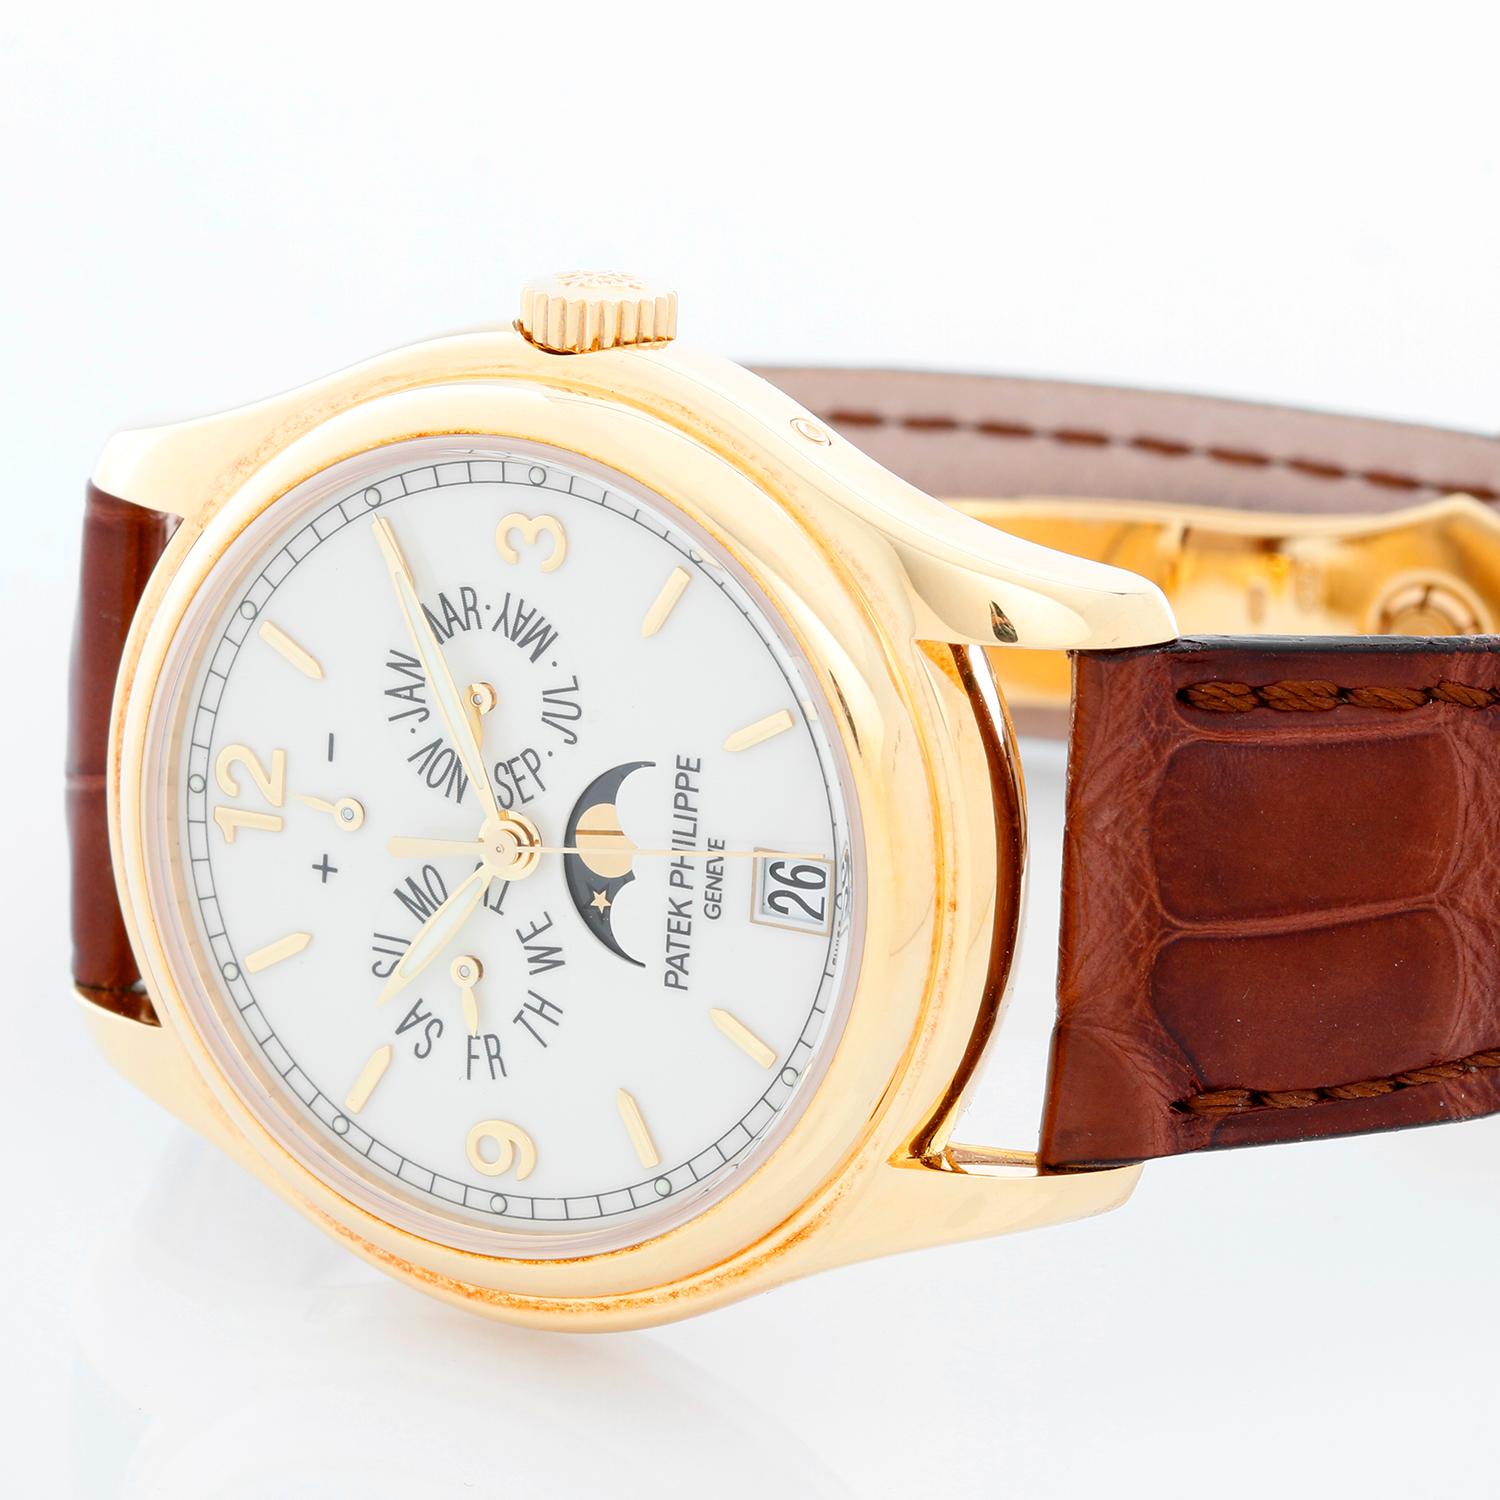 Patek Philippe Annual Calendar Yellow Gold Men's Moonphase Watch 5146J (5146 J) - Automatic winding; day, date, month and moonphase. 18k yellow gold case with exposition back to view movement (39mm diameter). Cream colored dial with gold Arabic